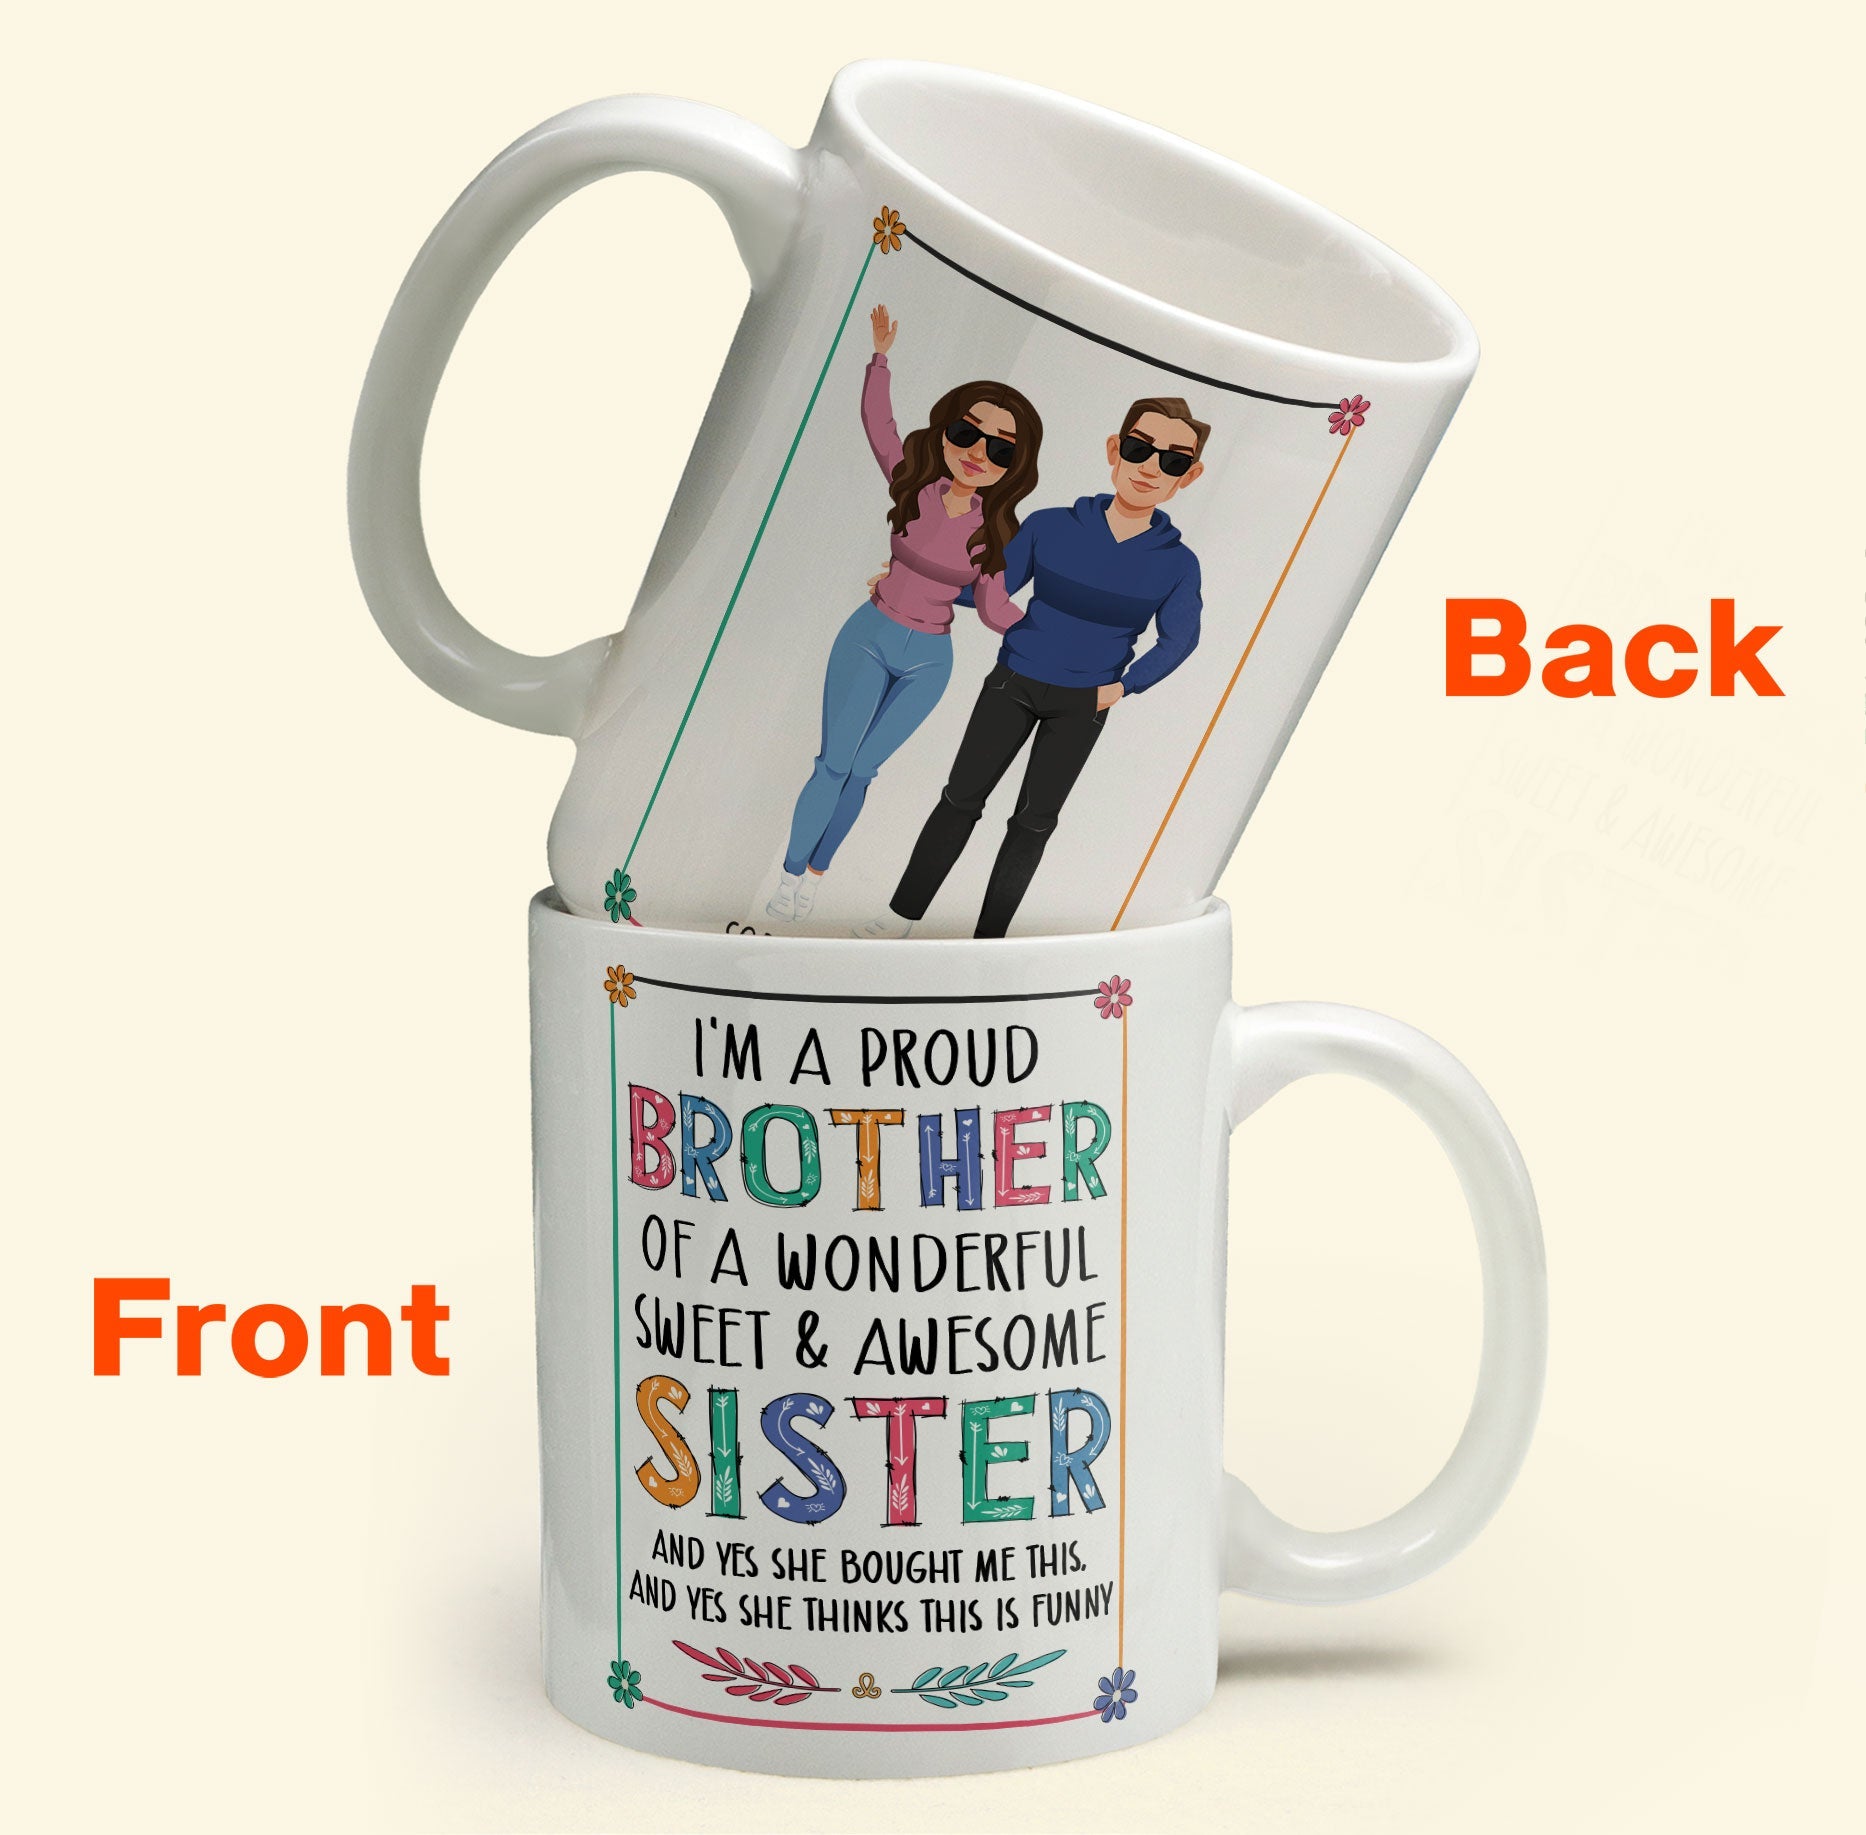 I'm A Proud Step-Mom Of Awesome Step-Son Mothers Day Mug 11oz